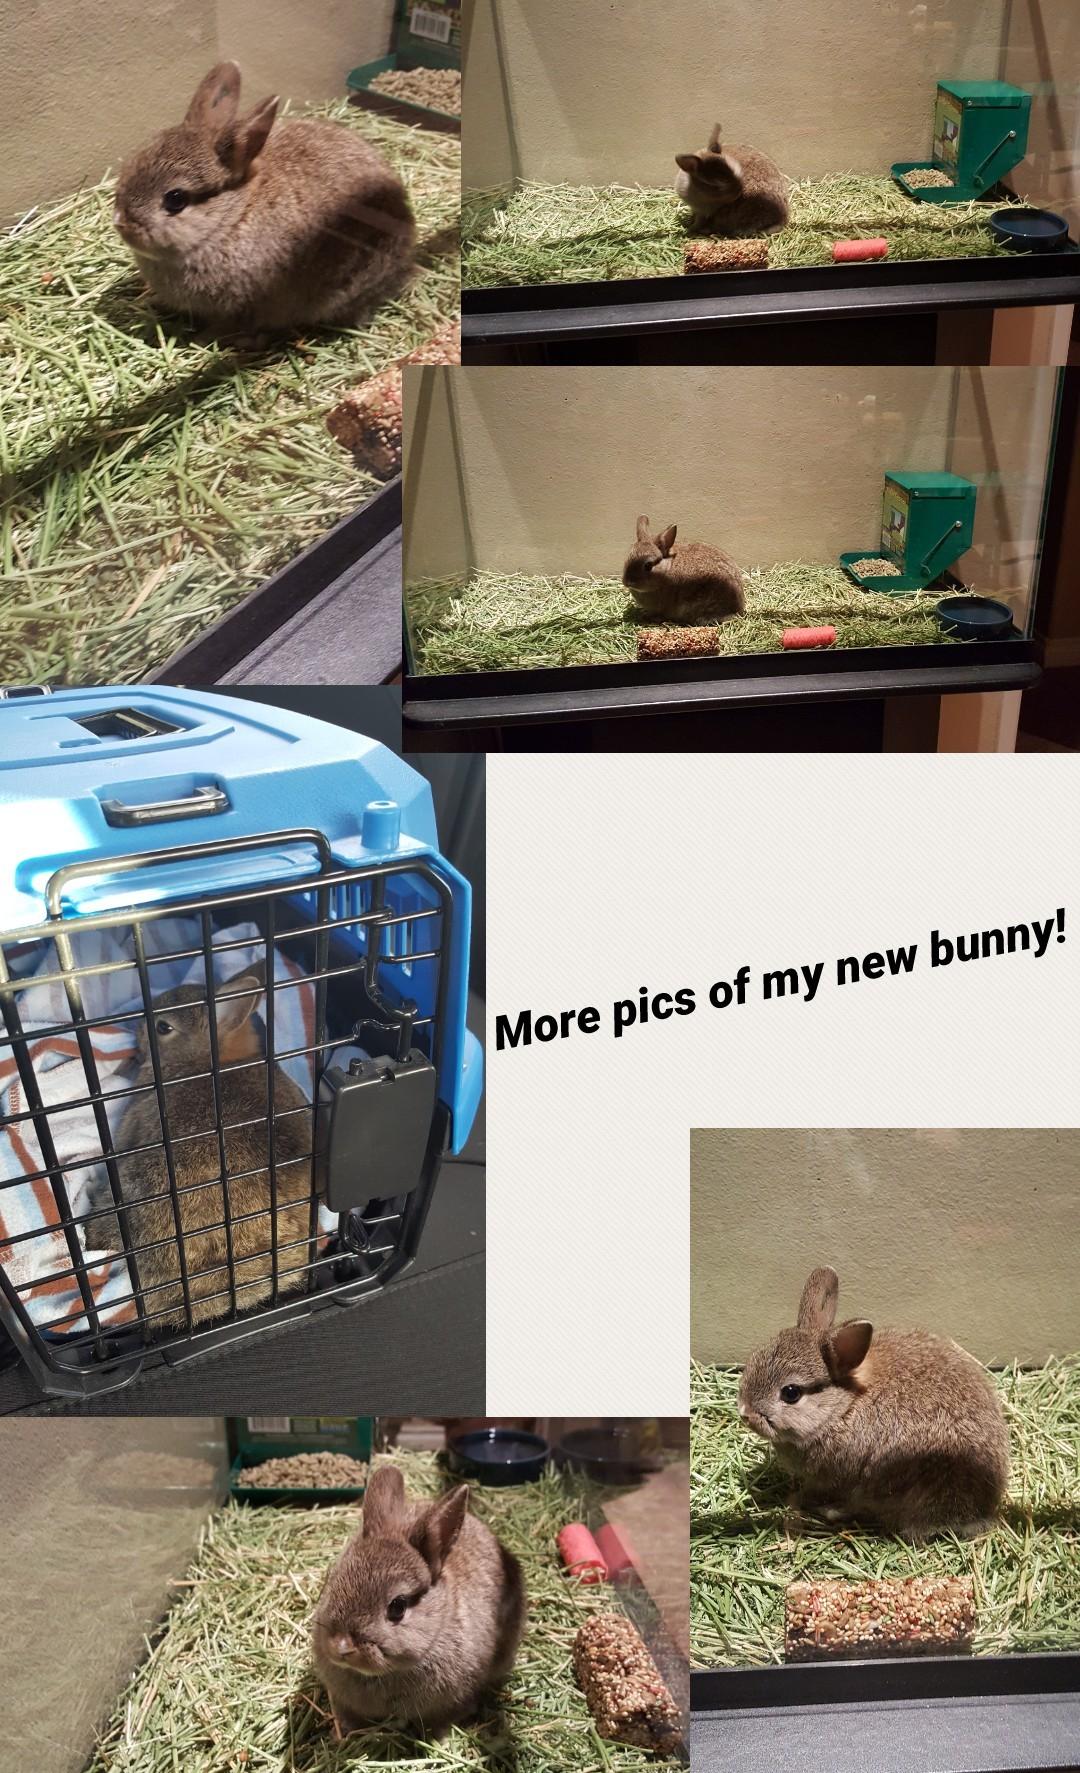 More pics of my new bunny!